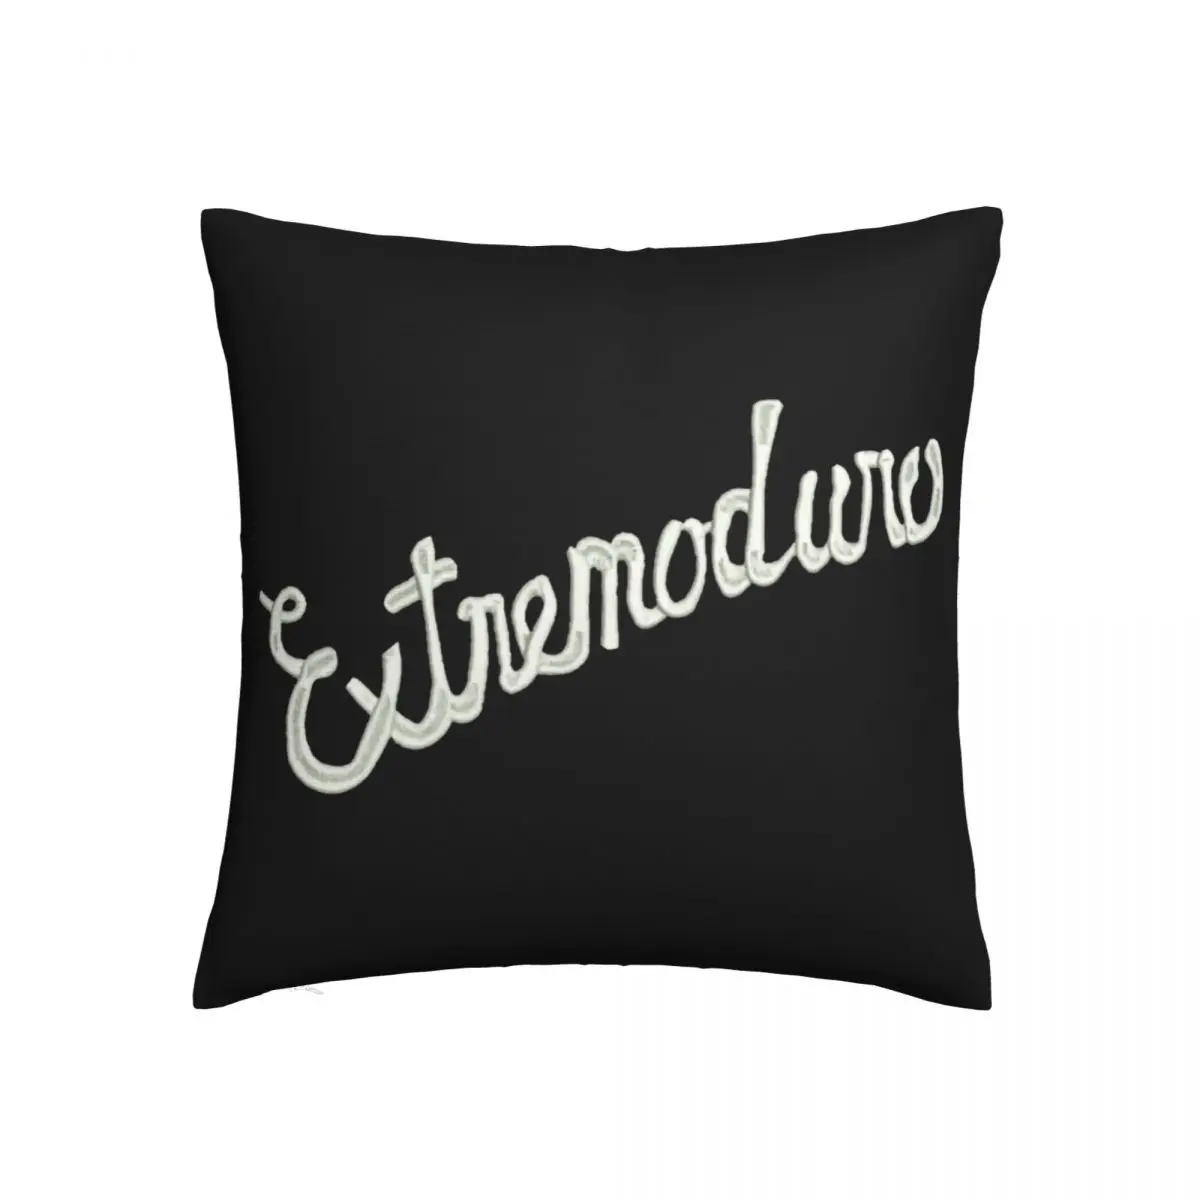 

Square Pillow EXTREMODURO Funny R251 Weeping Willow Square Pillow Print Graphic Bolster